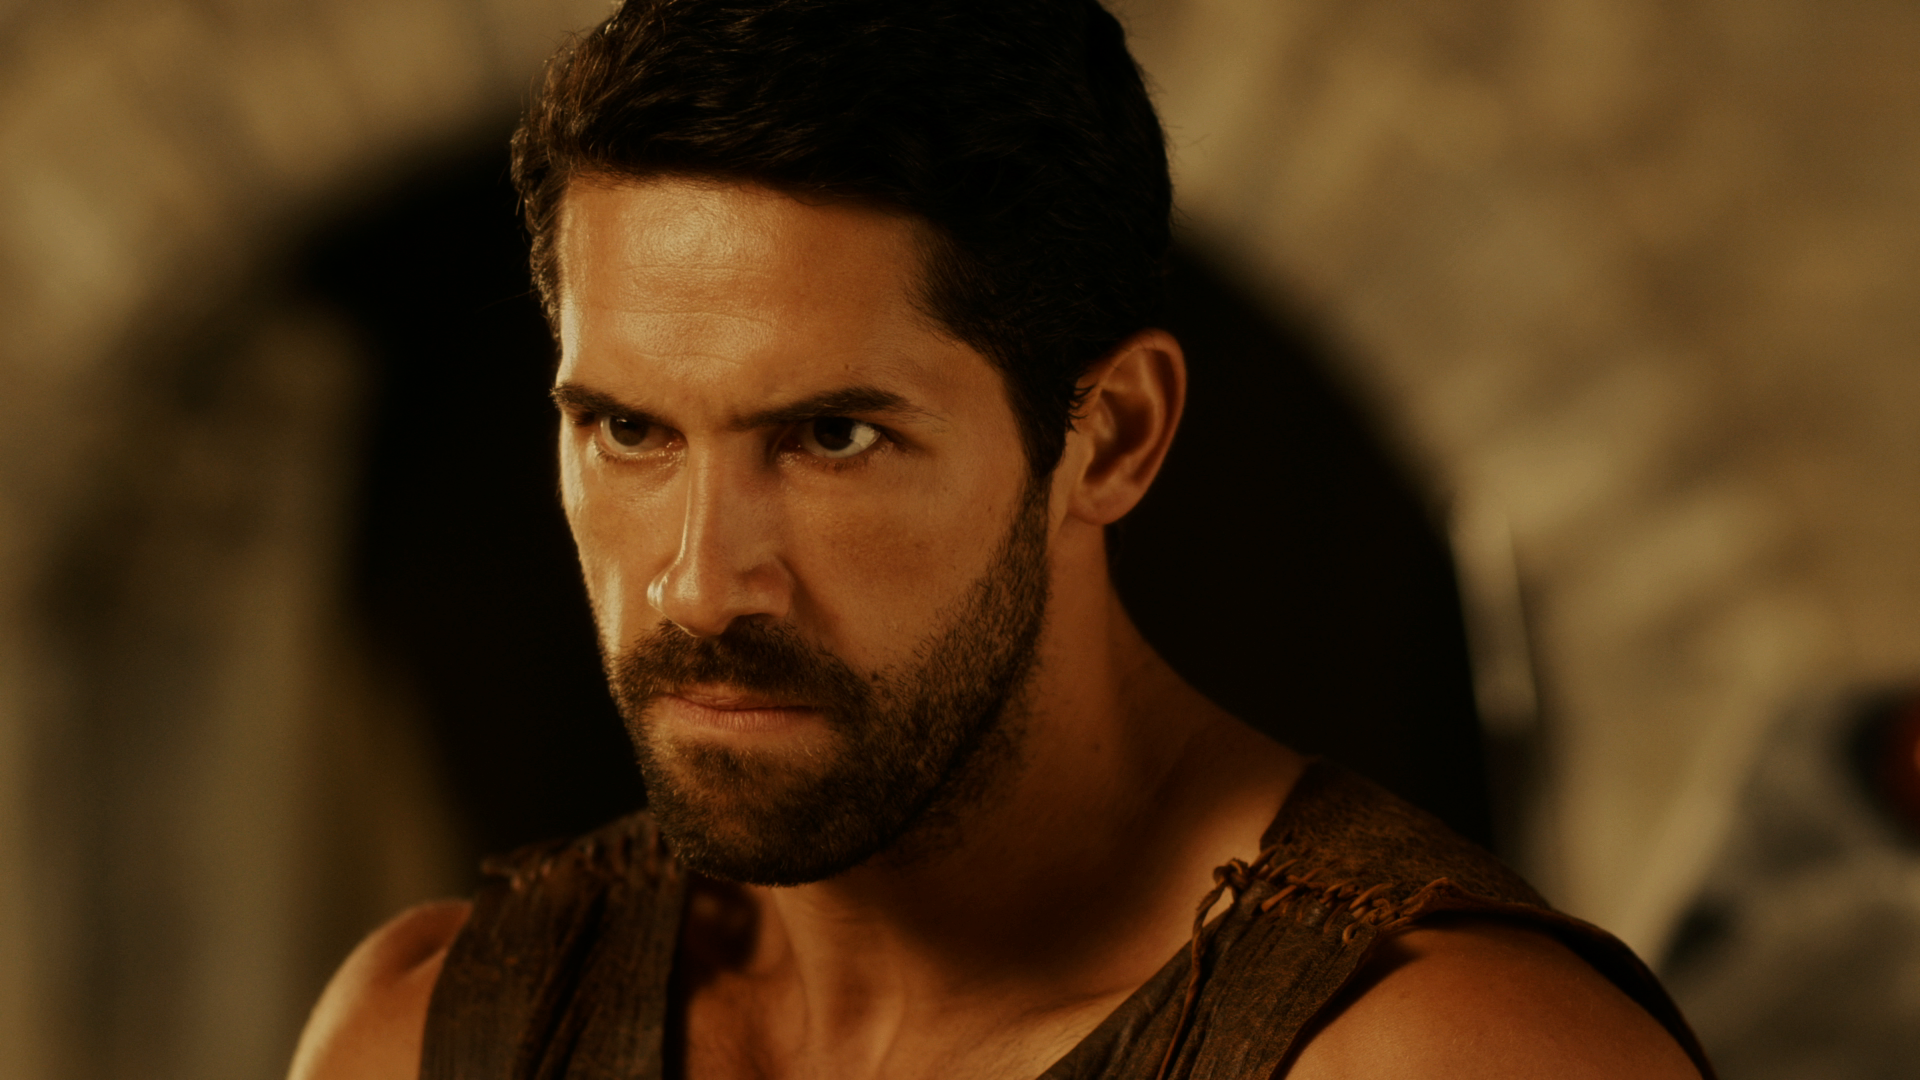 Scott Adkins wallpapers and images - wallpapers, pictures, photos